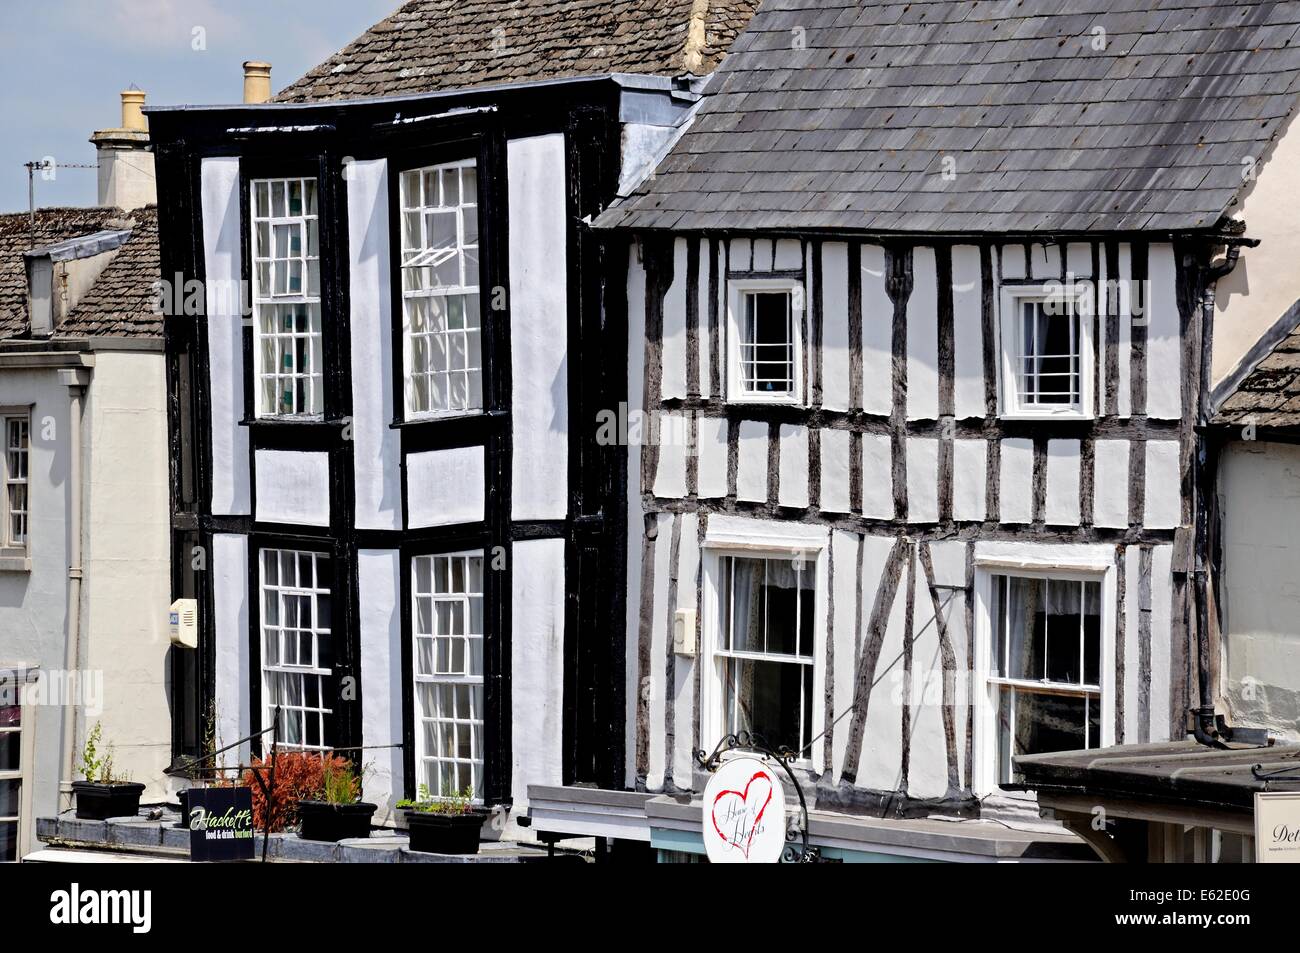 Black and white timbered buildings along the High Street, Burford, Oxfordshire, England, UK, Western Europe. Stock Photo